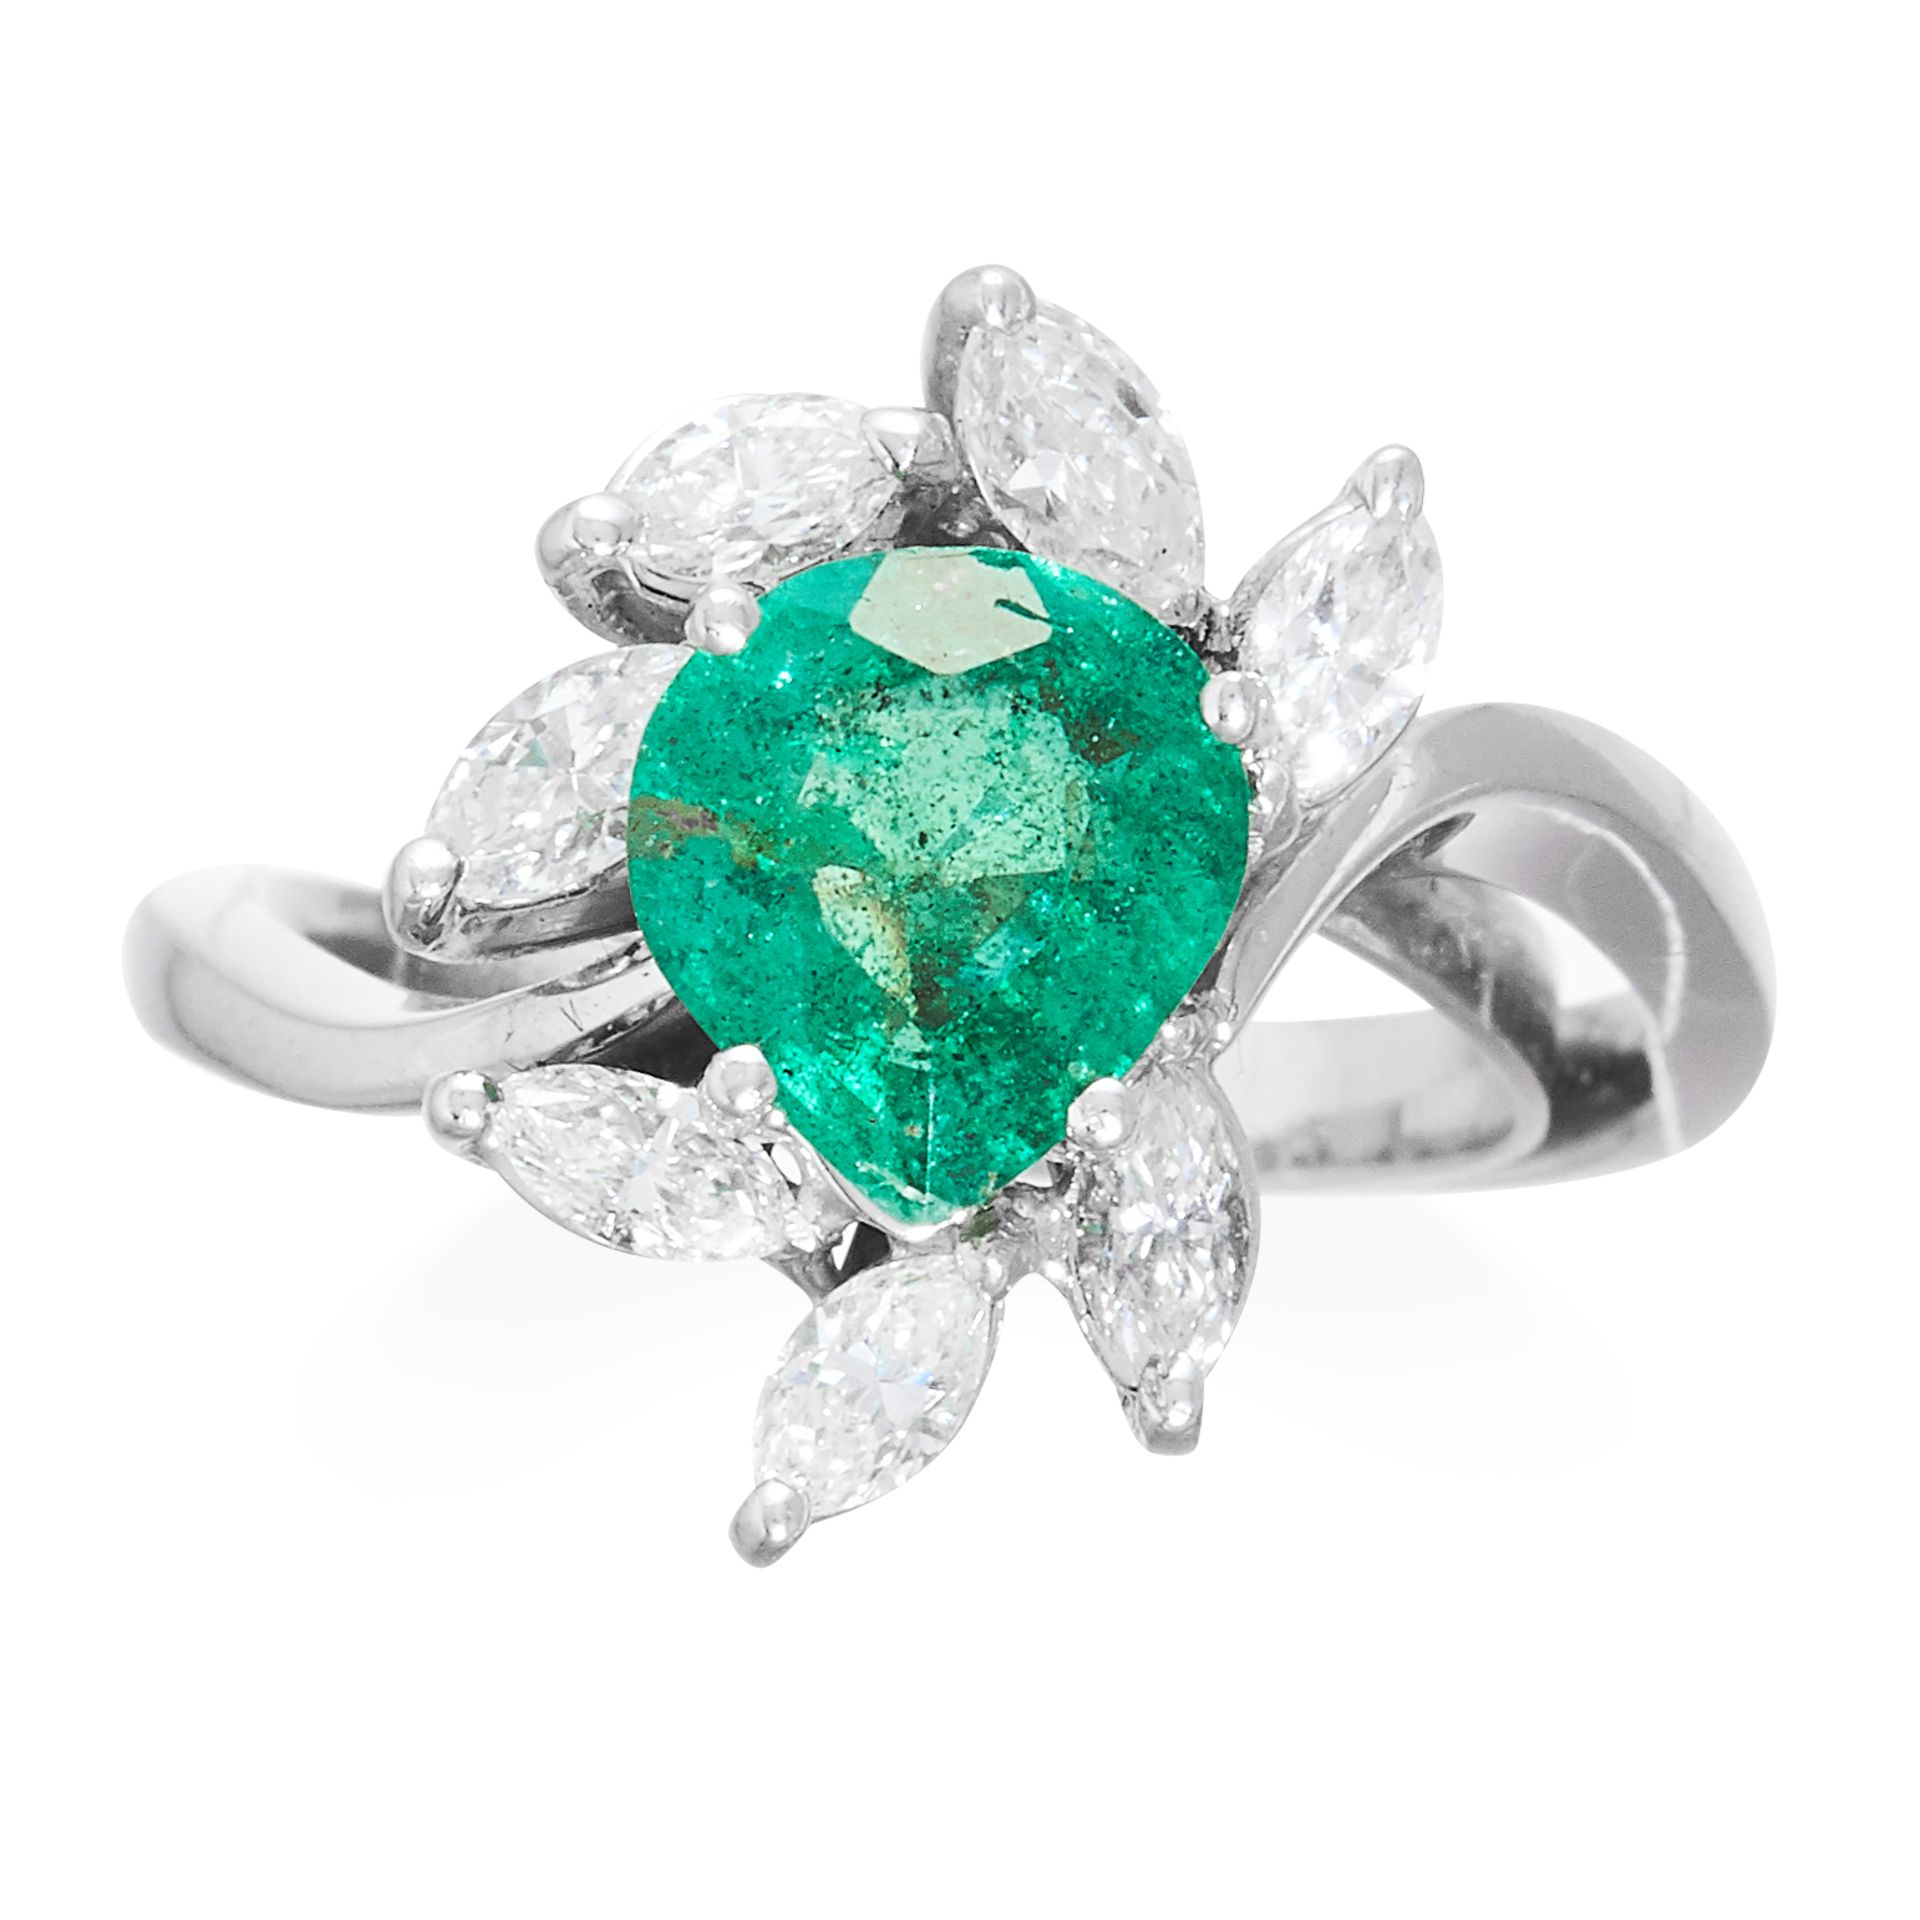 AN EMERALD AND DIAMOND RING in platinum or white gold set with a pear cut emerald of 1.35 carats